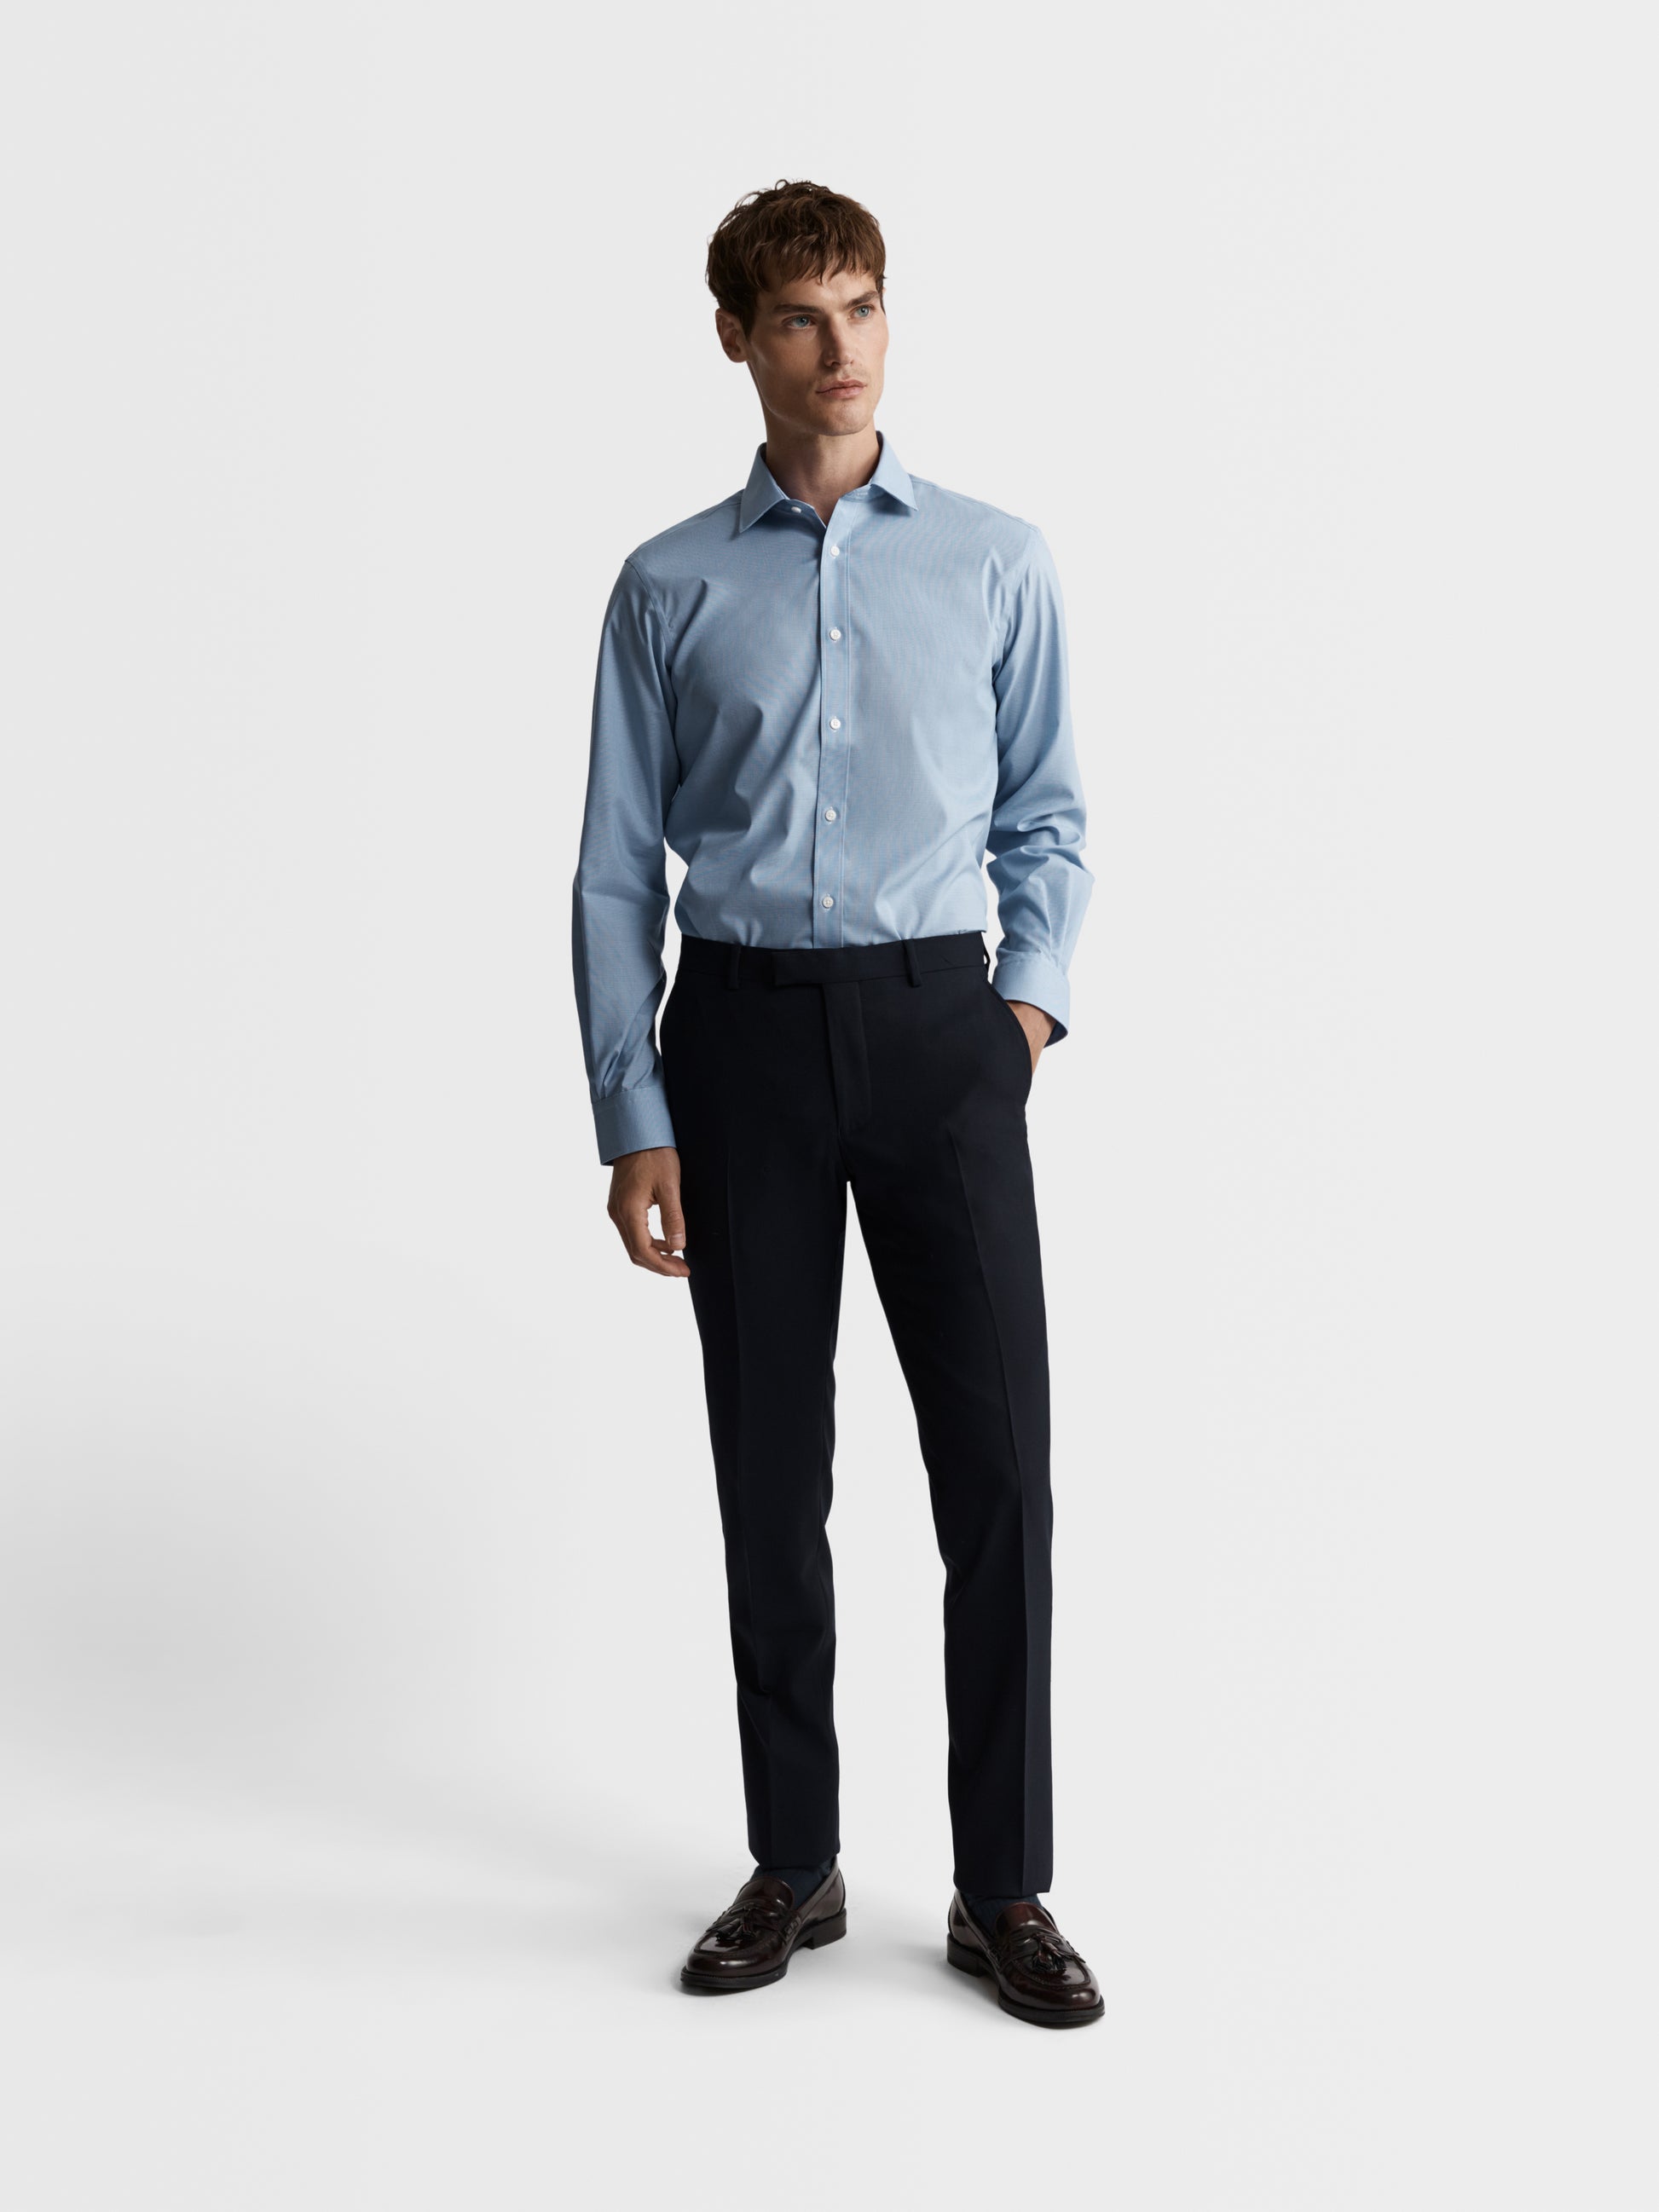 Image 4 of Max Performance Blue Puppytooth Plain Weave Fitted Single Cuff Classic Collar Shirt